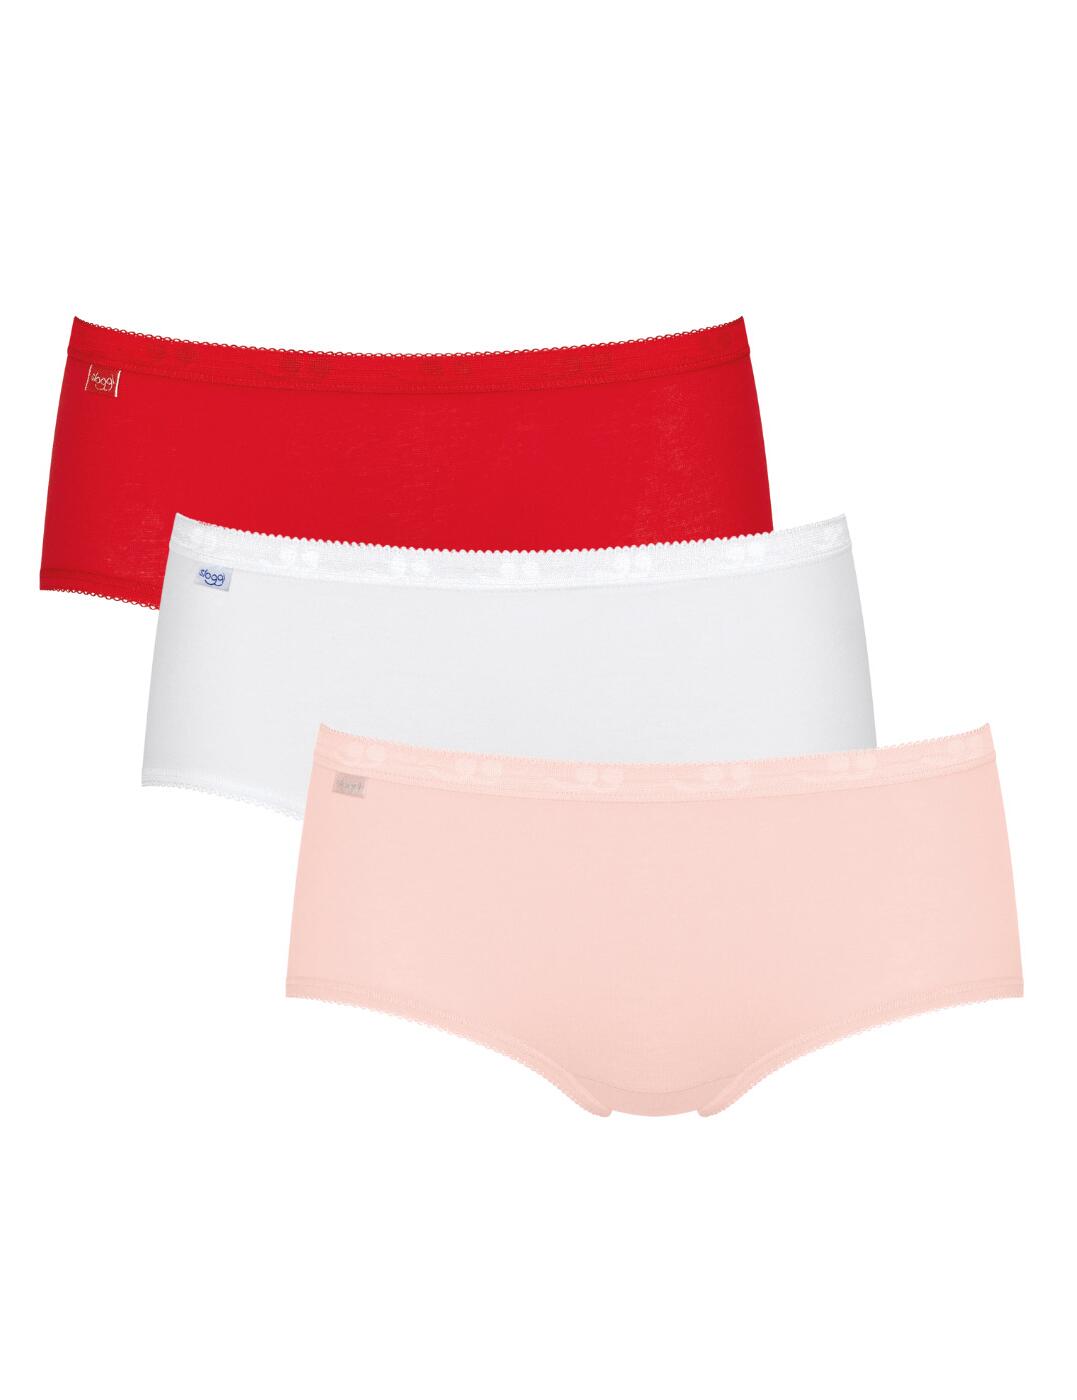 Limited time offer: Sloggi midi briefs on sale for over 50% off on